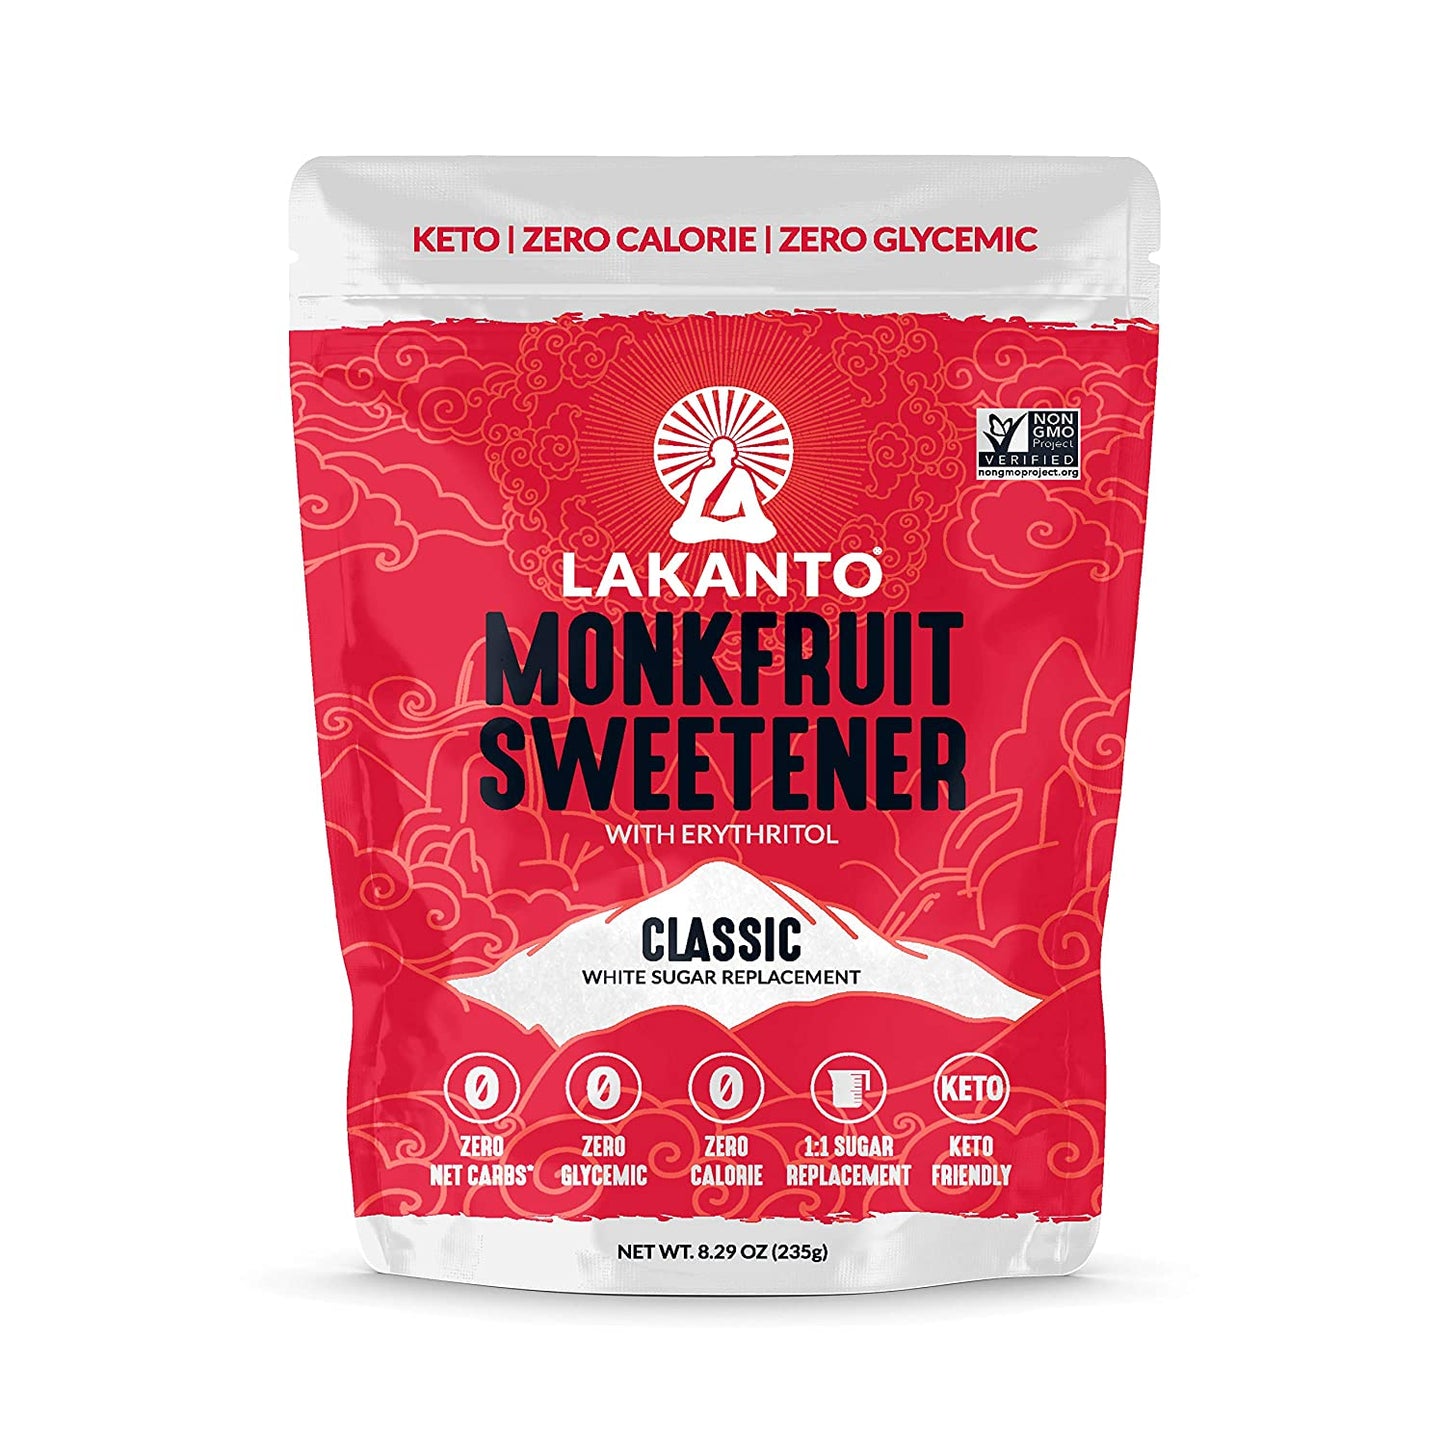 Lakanto Classic Monk Fruit Sweetener White Sugar Replacement. Lakanto Classic Monk Fruit Sweetener is the perfect white sugar substitute. Get this 0 calorie, 0 glycemic sugar alternative, and put your health first today! The best monkfruit sweetener. | 1:1 White Sugar Replacement | Zero calories | Zero Glycemic | Zero Carbs | Keto Diet Friendly